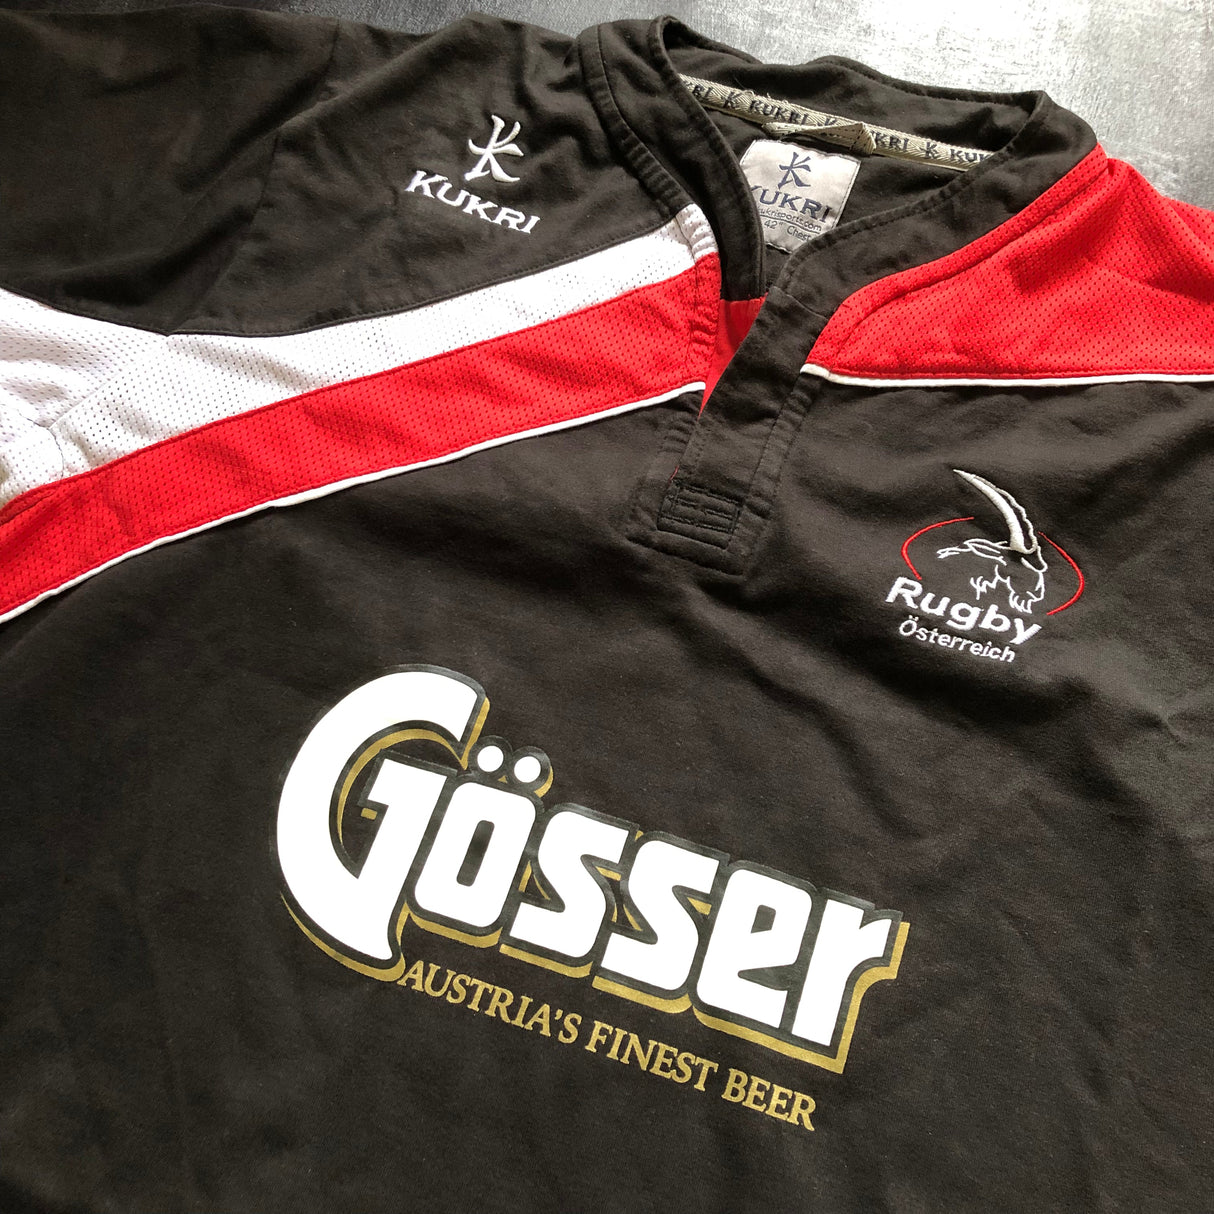 Austria National Rugby Team Jersey 2010/11 Large Underdog Rugby - The Tier 2 Rugby Shop 